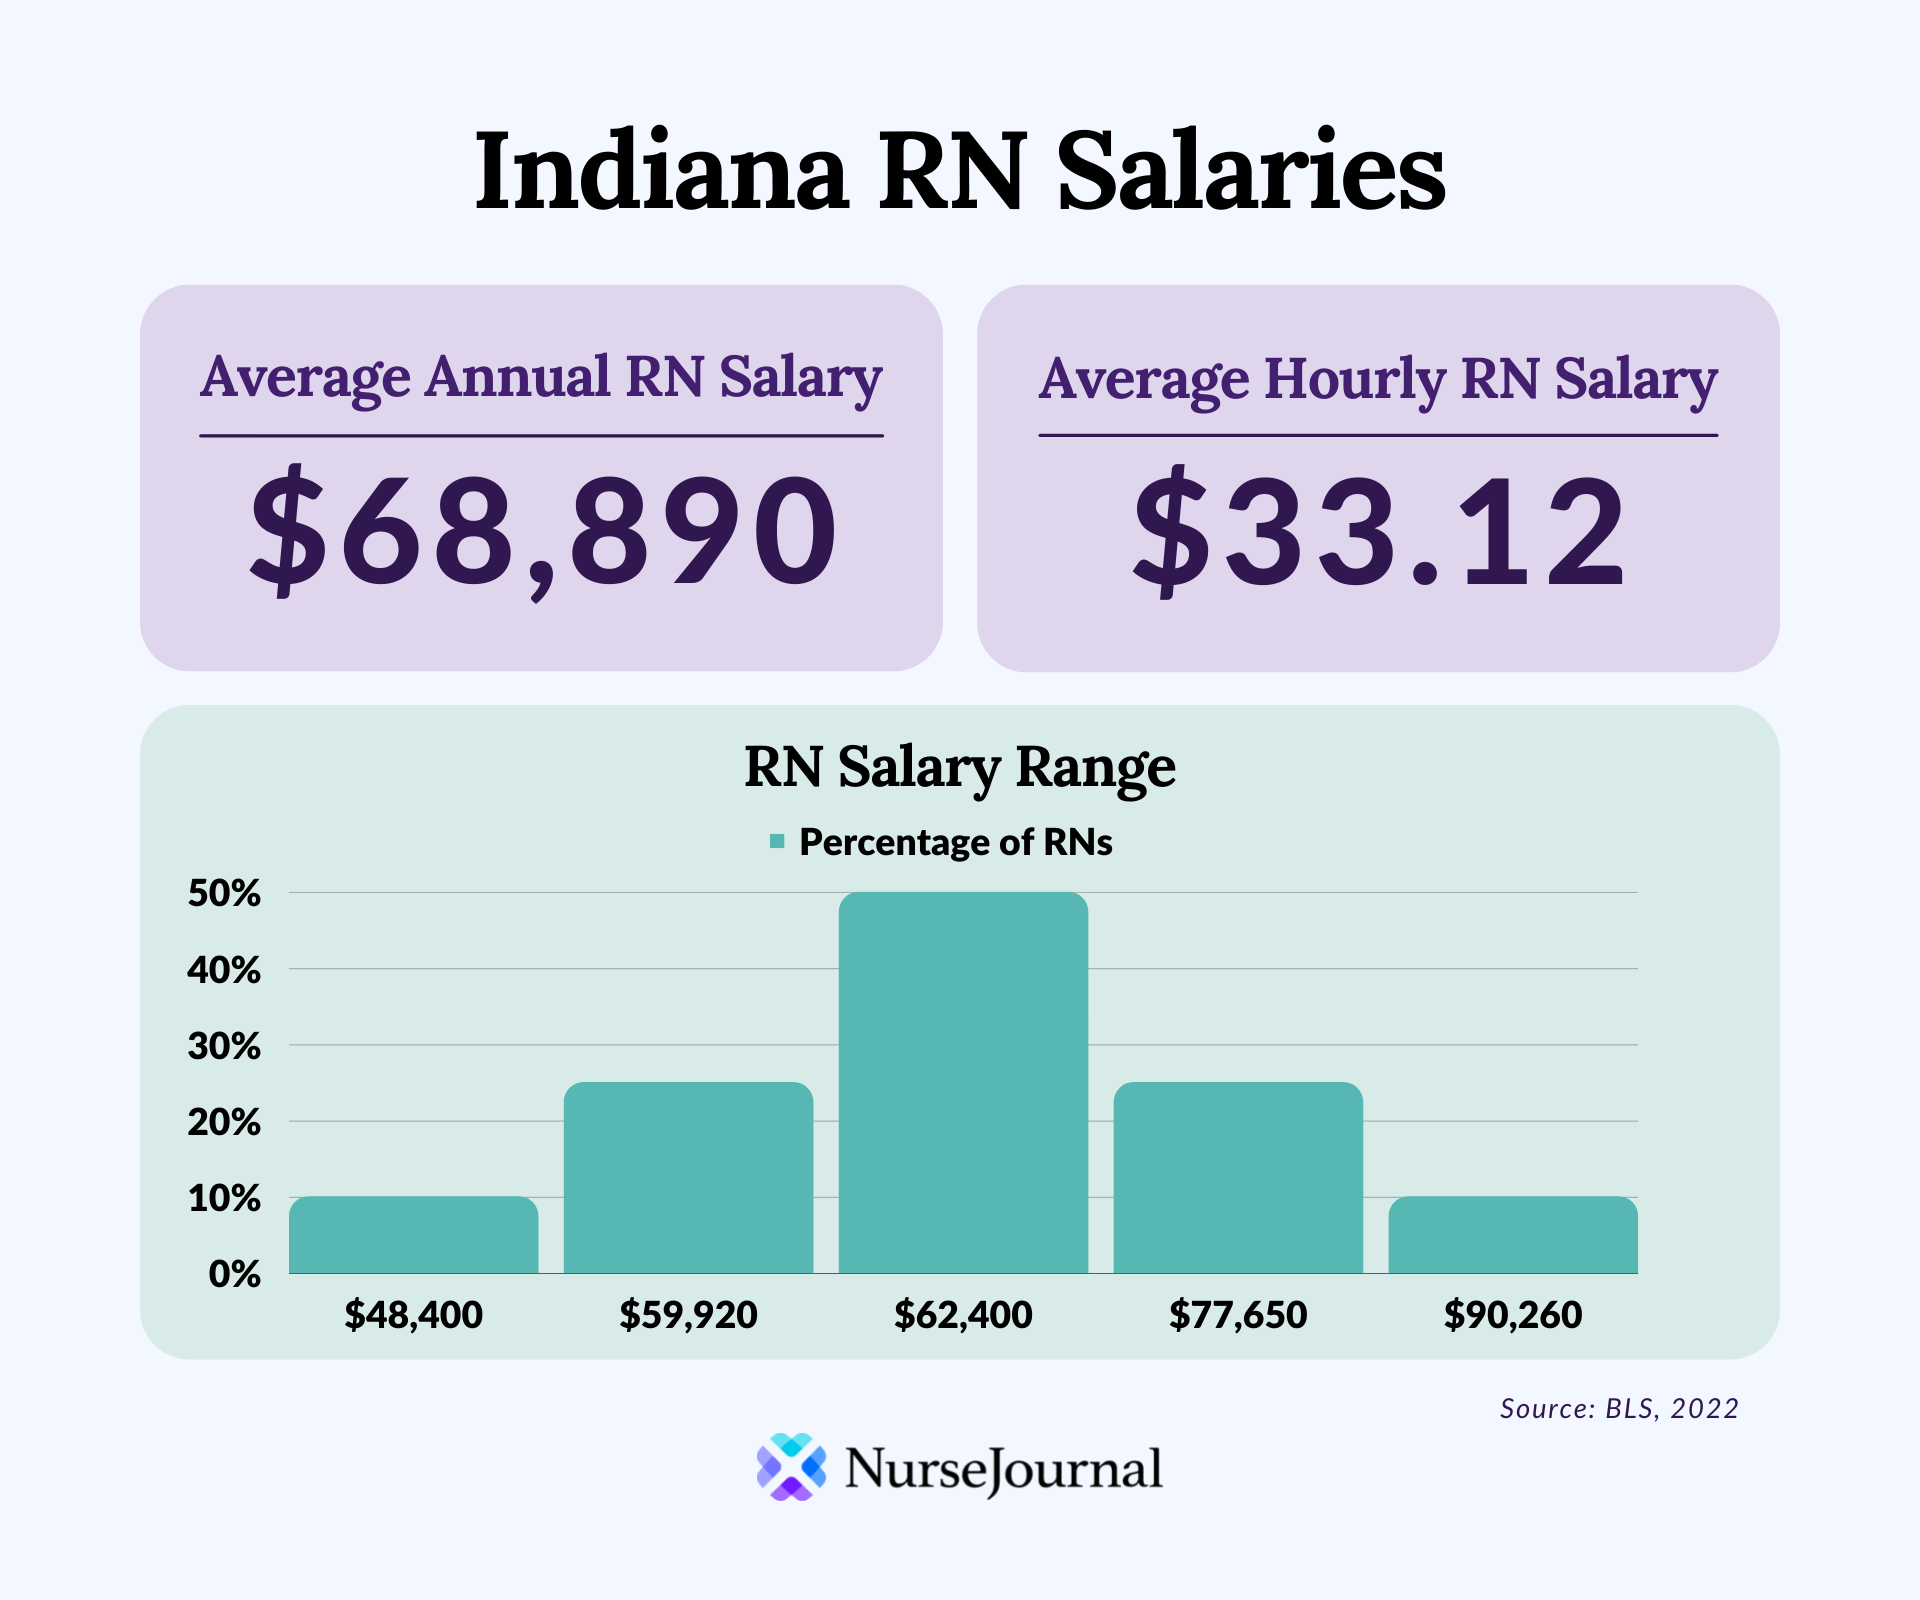 Infographic of registered nursing salary data in Indiana. The average annual RN salary is $68,890. The average hourly RN salary is $33.12. Average RN salaries range from 48400 among the bottom 10th percentile of earners to $90,260 among the top 90th percentile of earners.